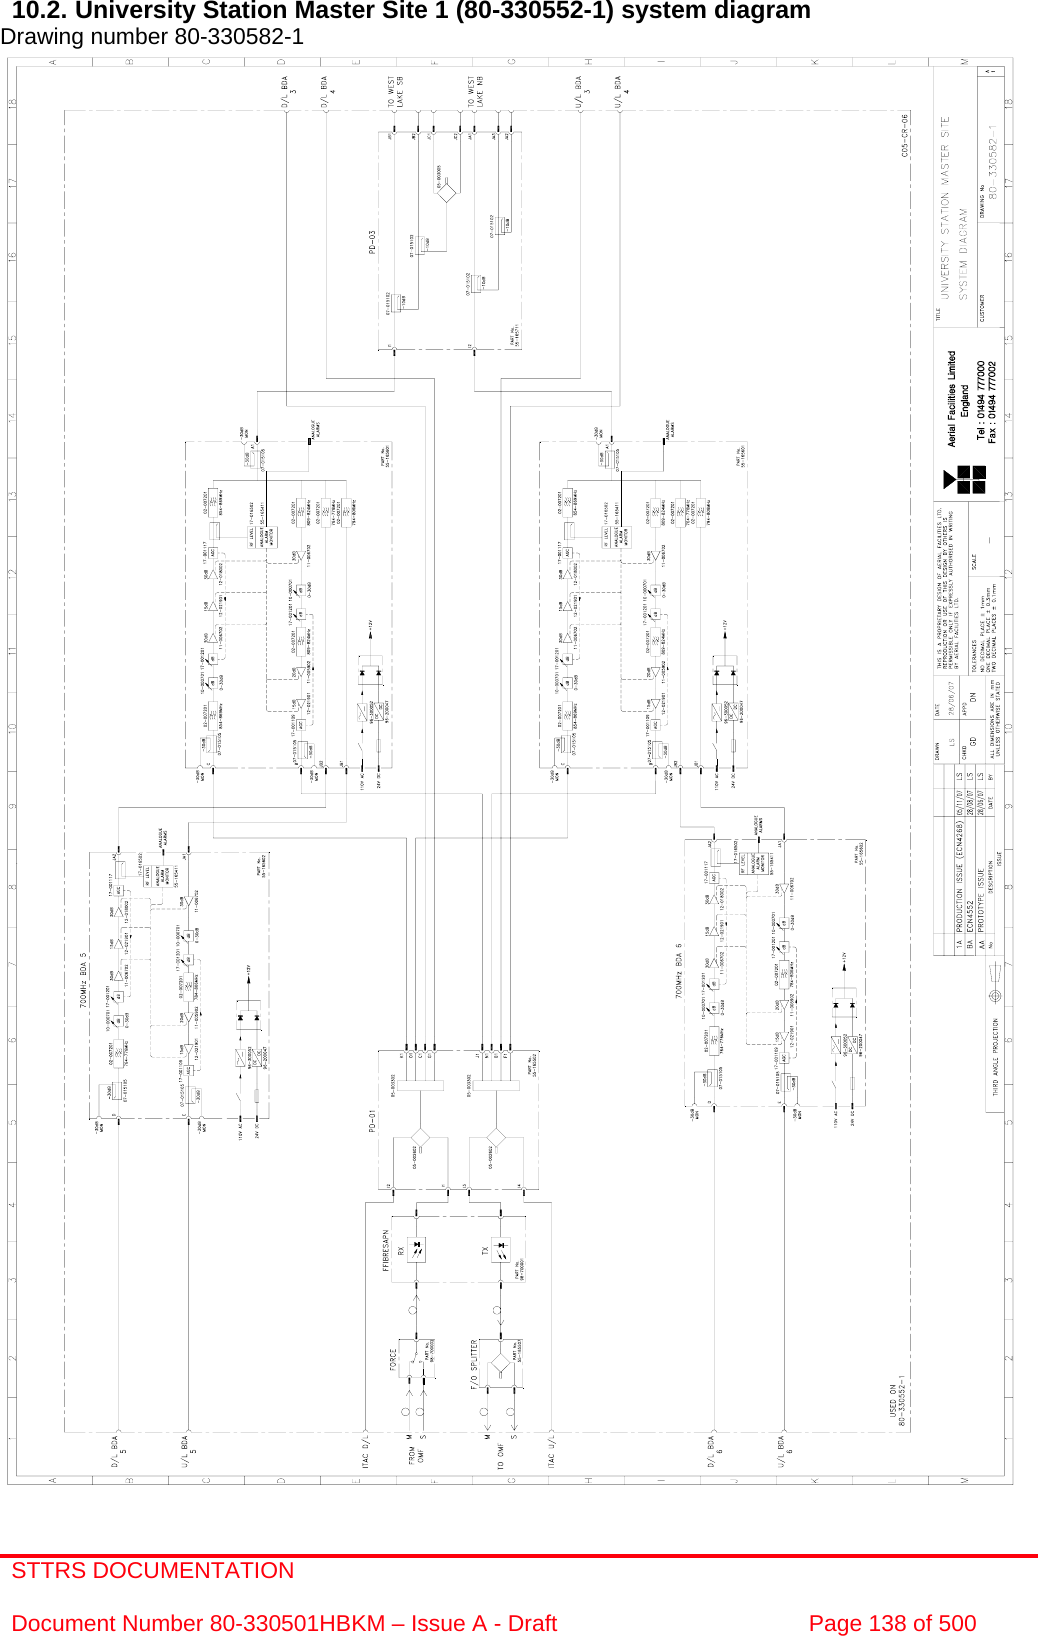 STTRS DOCUMENTATION  Document Number 80-330501HBKM – Issue A - Draft  Page 138 of 500   10.2. University Station Master Site 1 (80-330552-1) system diagram Drawing number 80-330582-1                                                         